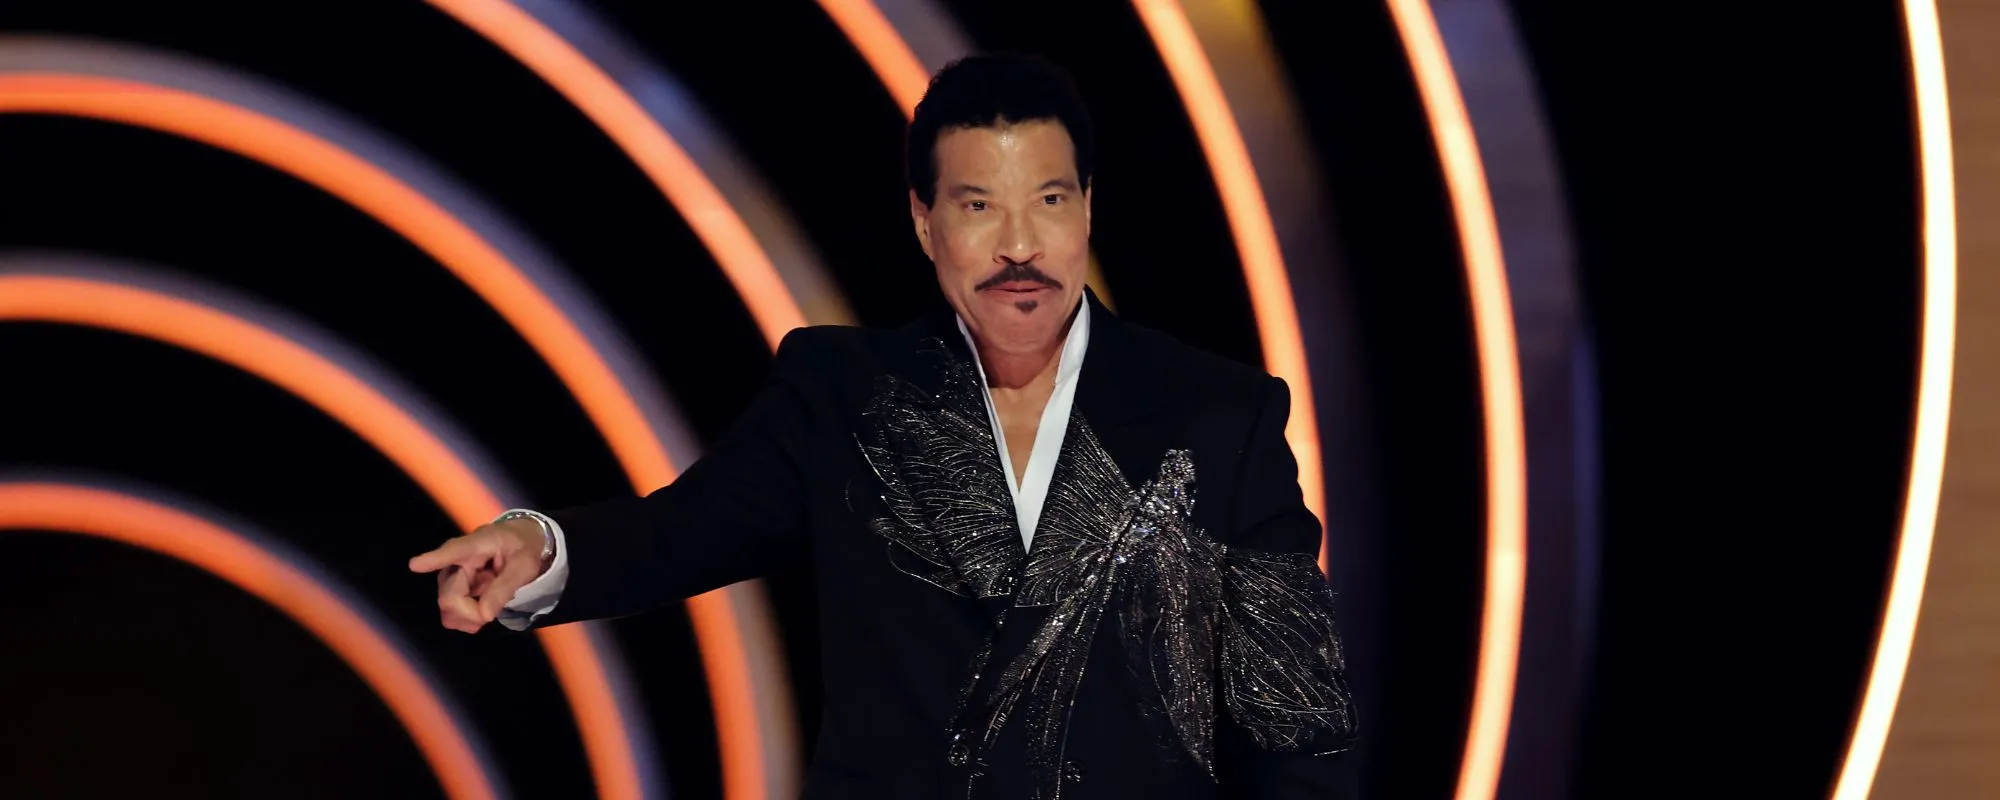 3 Fascinating Facts About ‘American Idol’ Judge Lionel Richie